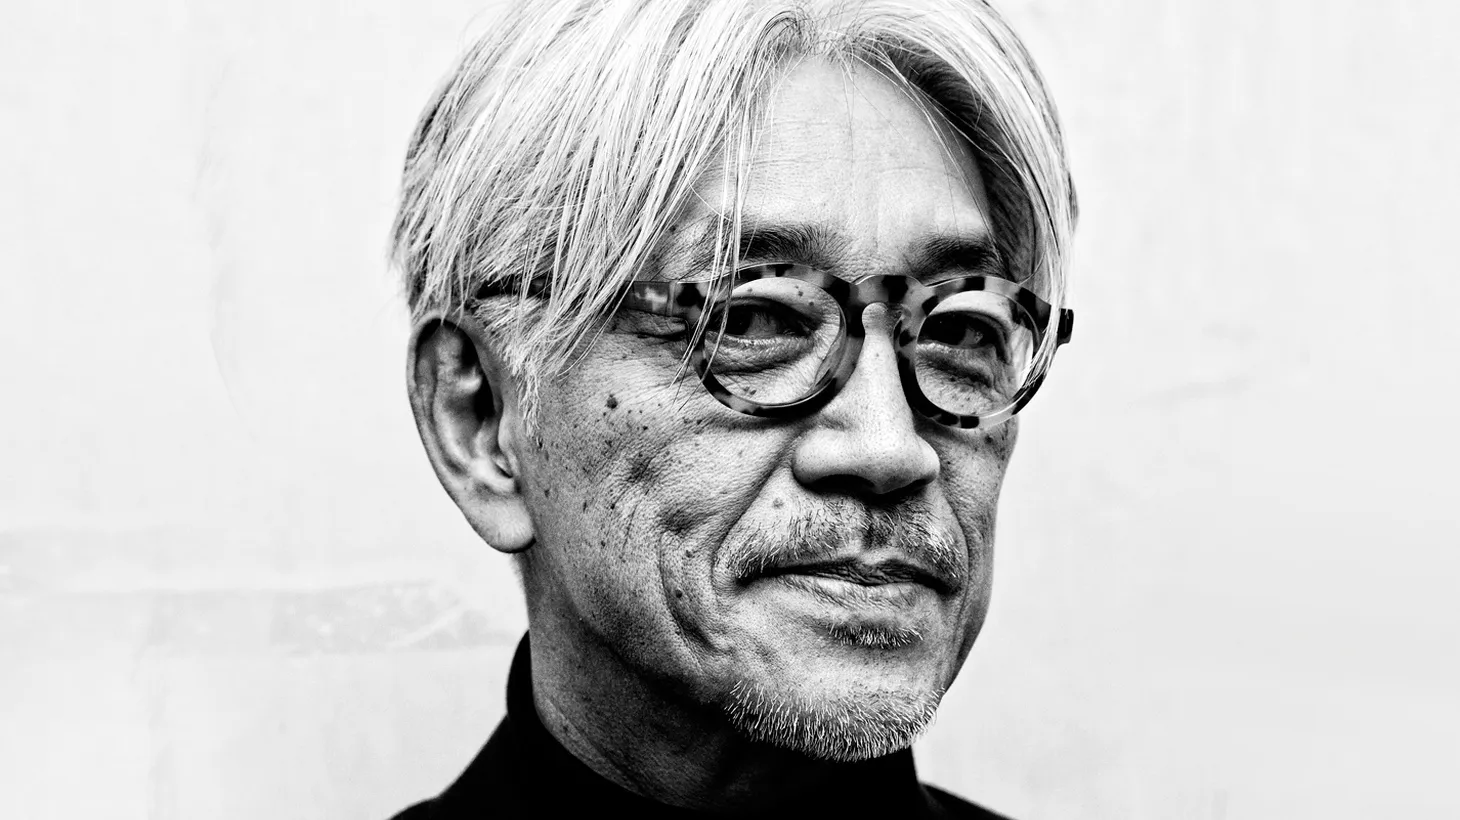 Legendary Japanese composer Ryuichi Sakamoto poses for a portrait at KCRW in 2016.